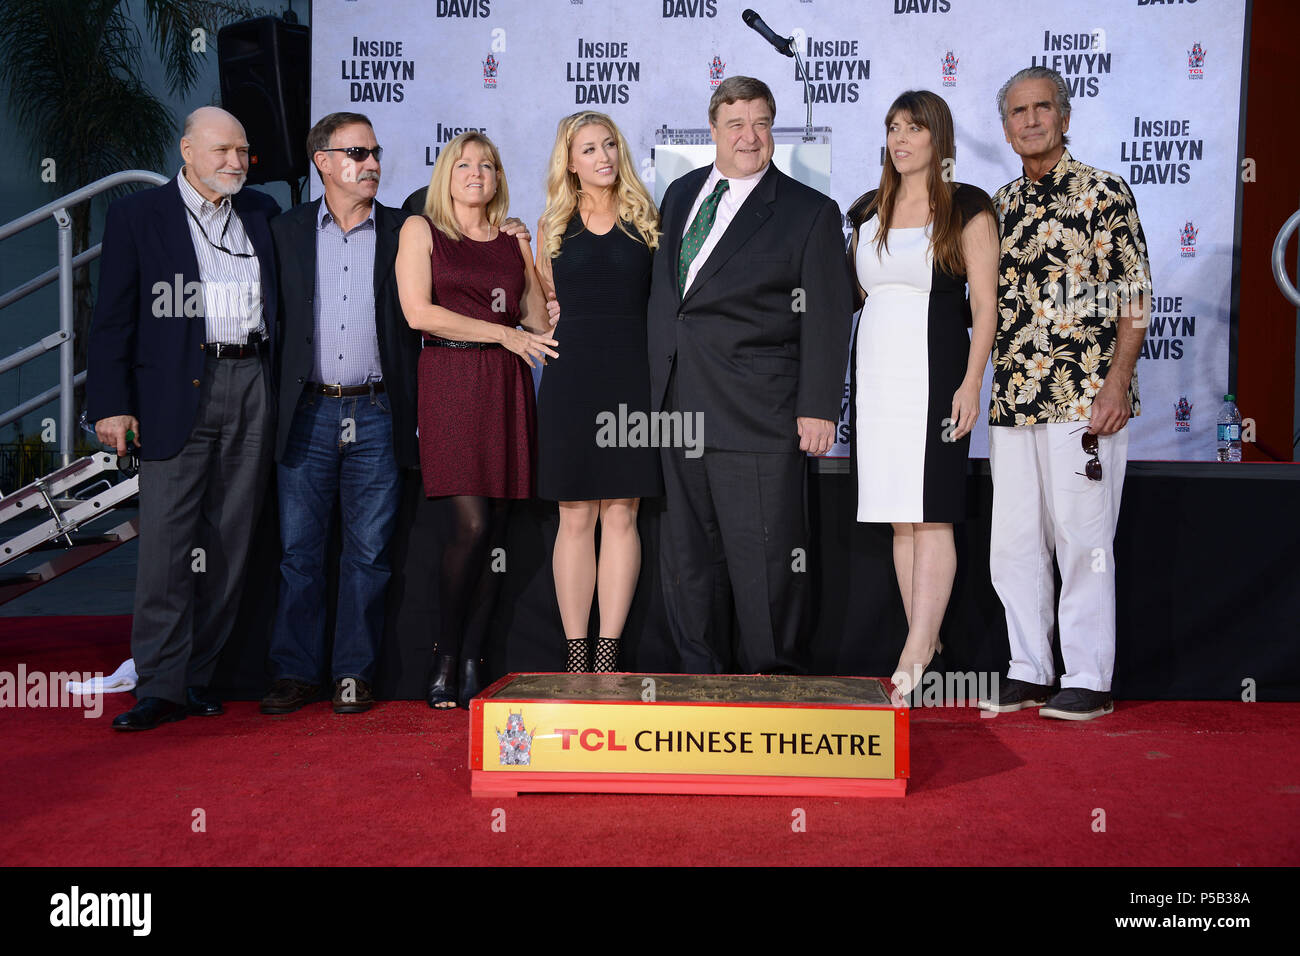 John Goodman, Wife Anna Beth Goodman  & Daughter Molly & Family  at the ceremony honoring John Goodman  with hand and foot print at the TCL Chinese Theatre in Los Angeles.John Goodman, Wife Anna Beth Goodman  & Daughter Molly & Family 015 ------------- Red Carpet Event, Vertical, USA, Film Industry, Celebrities,  Photography, Bestof, Arts Culture and Entertainment, Topix Celebrities fashion /  Vertical, Best of, Event in Hollywood Life - California,  Red Carpet and backstage, USA, Film Industry, Celebrities,  movie celebrities, TV celebrities, Music celebrities, Photography, Bestof, Arts Cultu Stock Photo